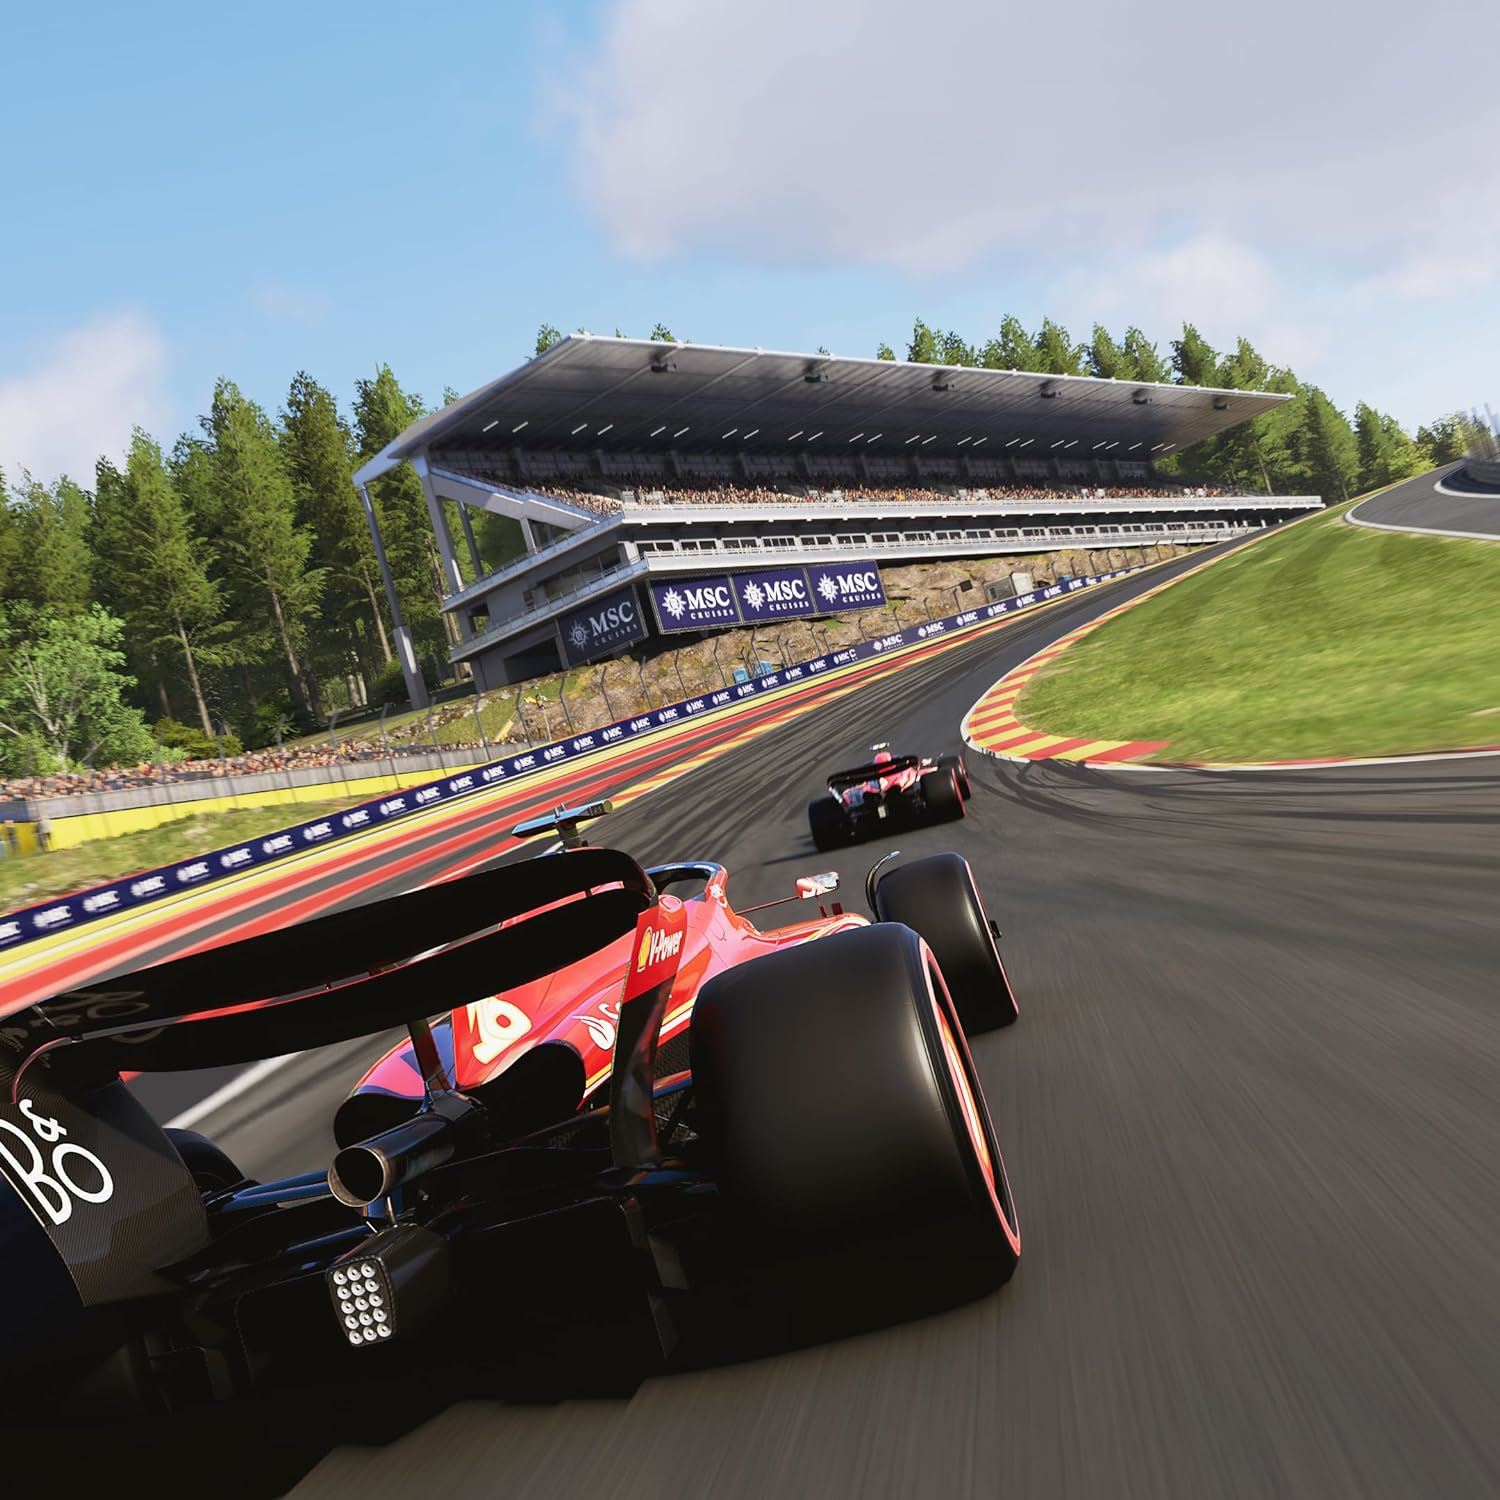 F1 24 Standard Edition PS5 Game